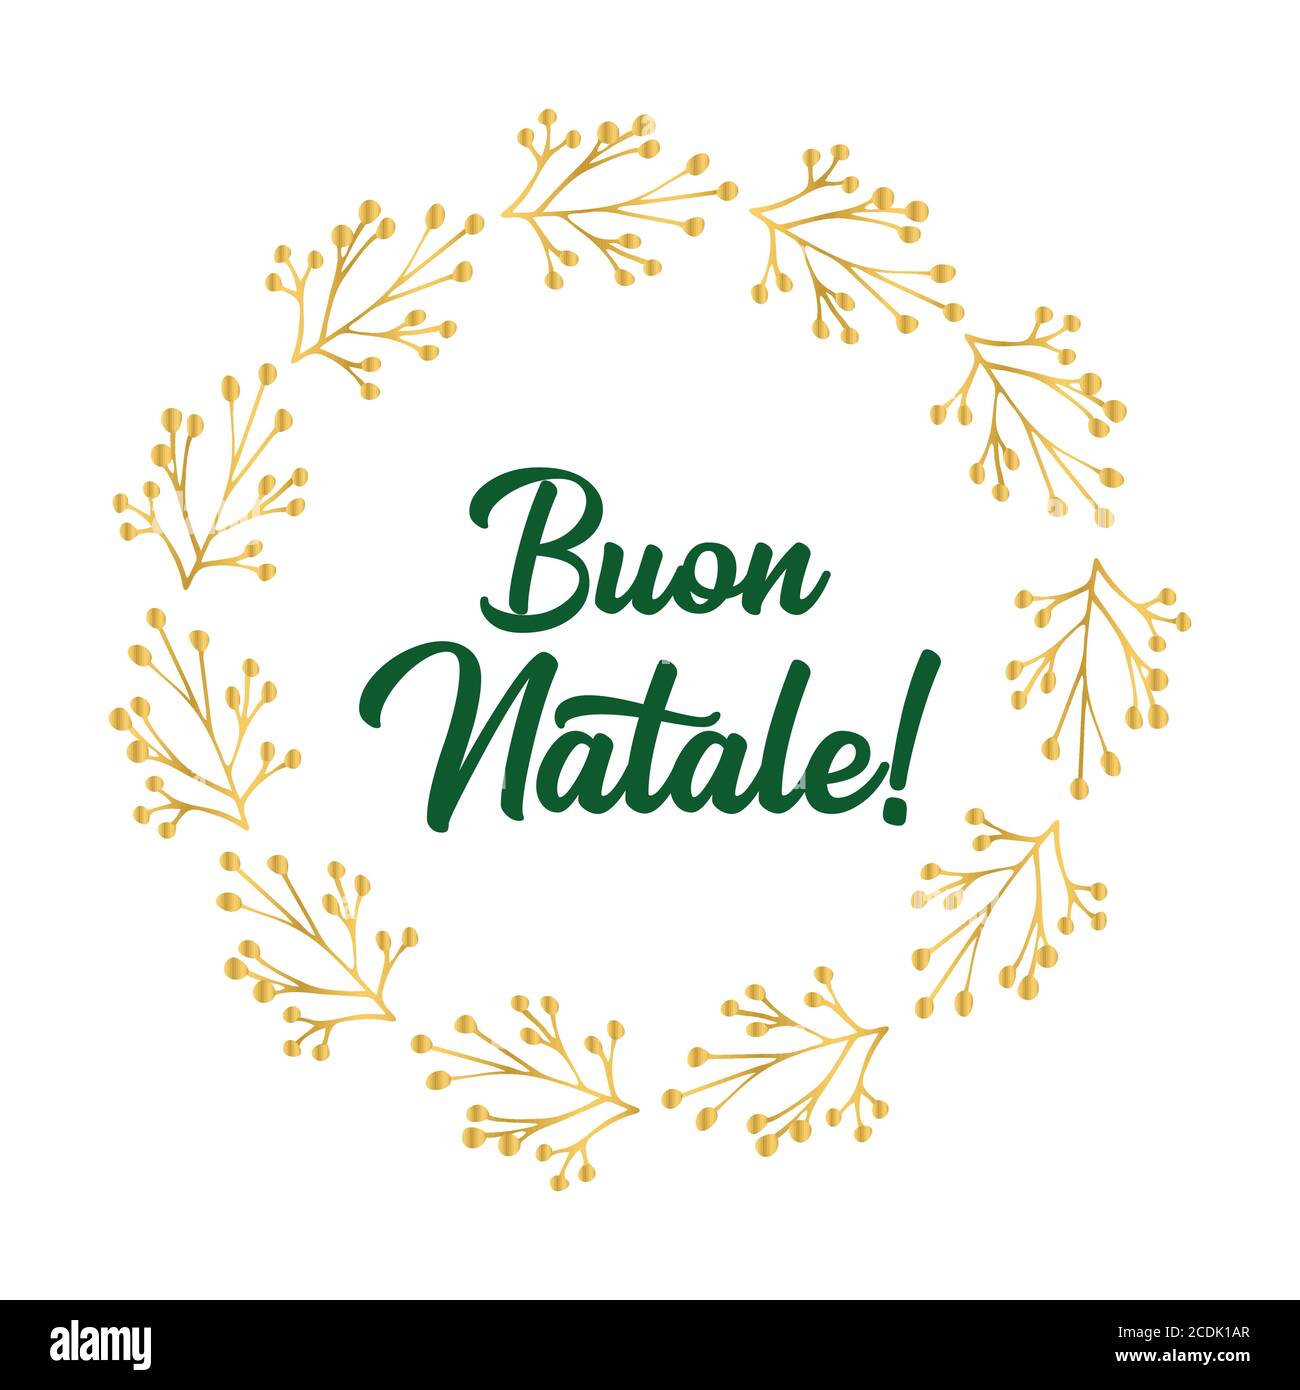 Logo Buon Natale.Buon Natale Quote In Italian With Wreath As Logo Or Header Translated Merry Christmas Celebration Lettering For Poster Card Invitation Stock Vector Image Art Alamy